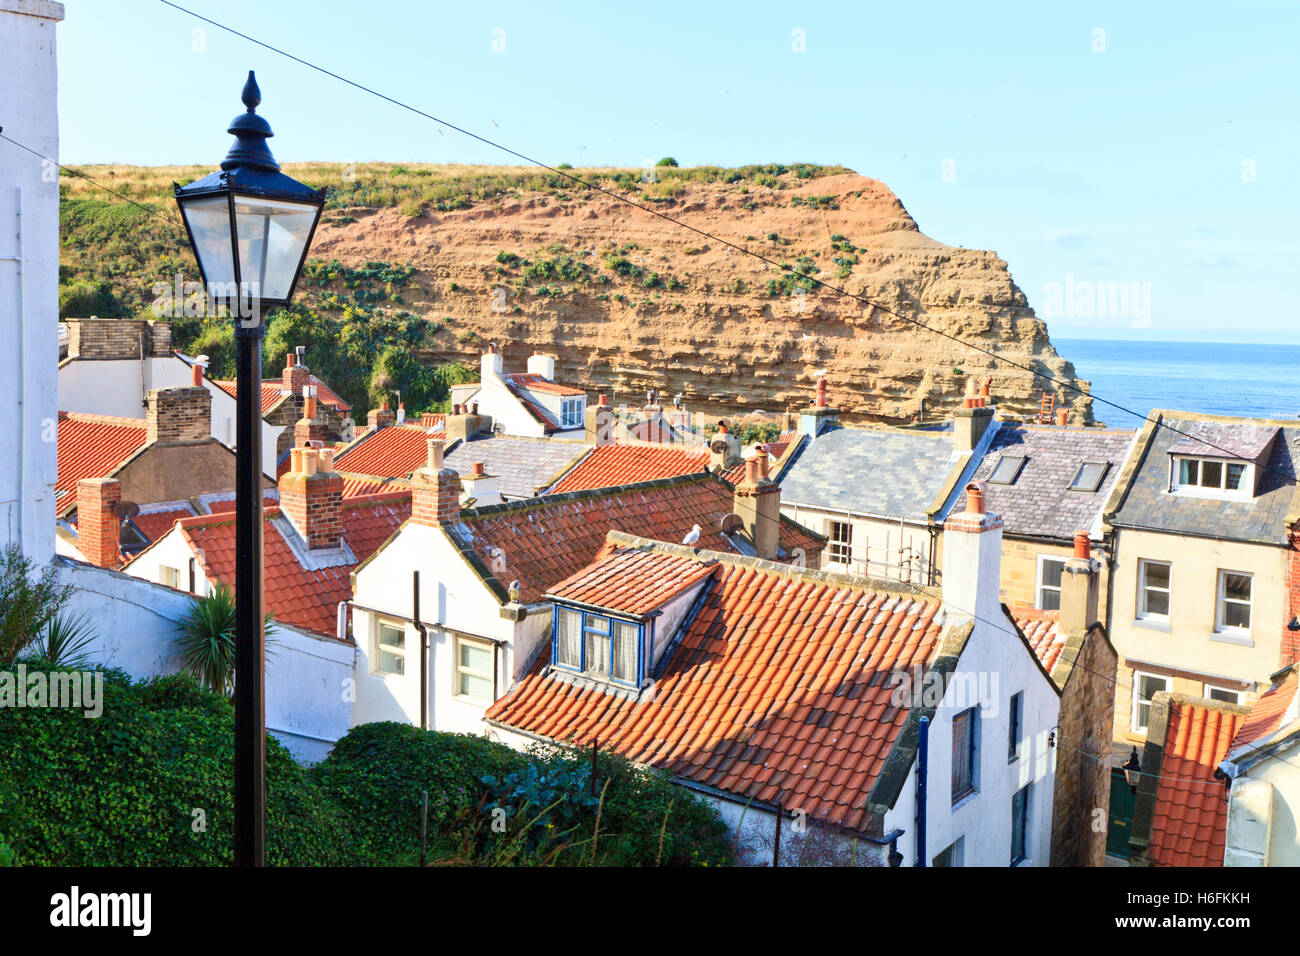 A tradional lamp post on a street above the red roofs of  Staithes Yorkshire Coast, England UK Stock Photo